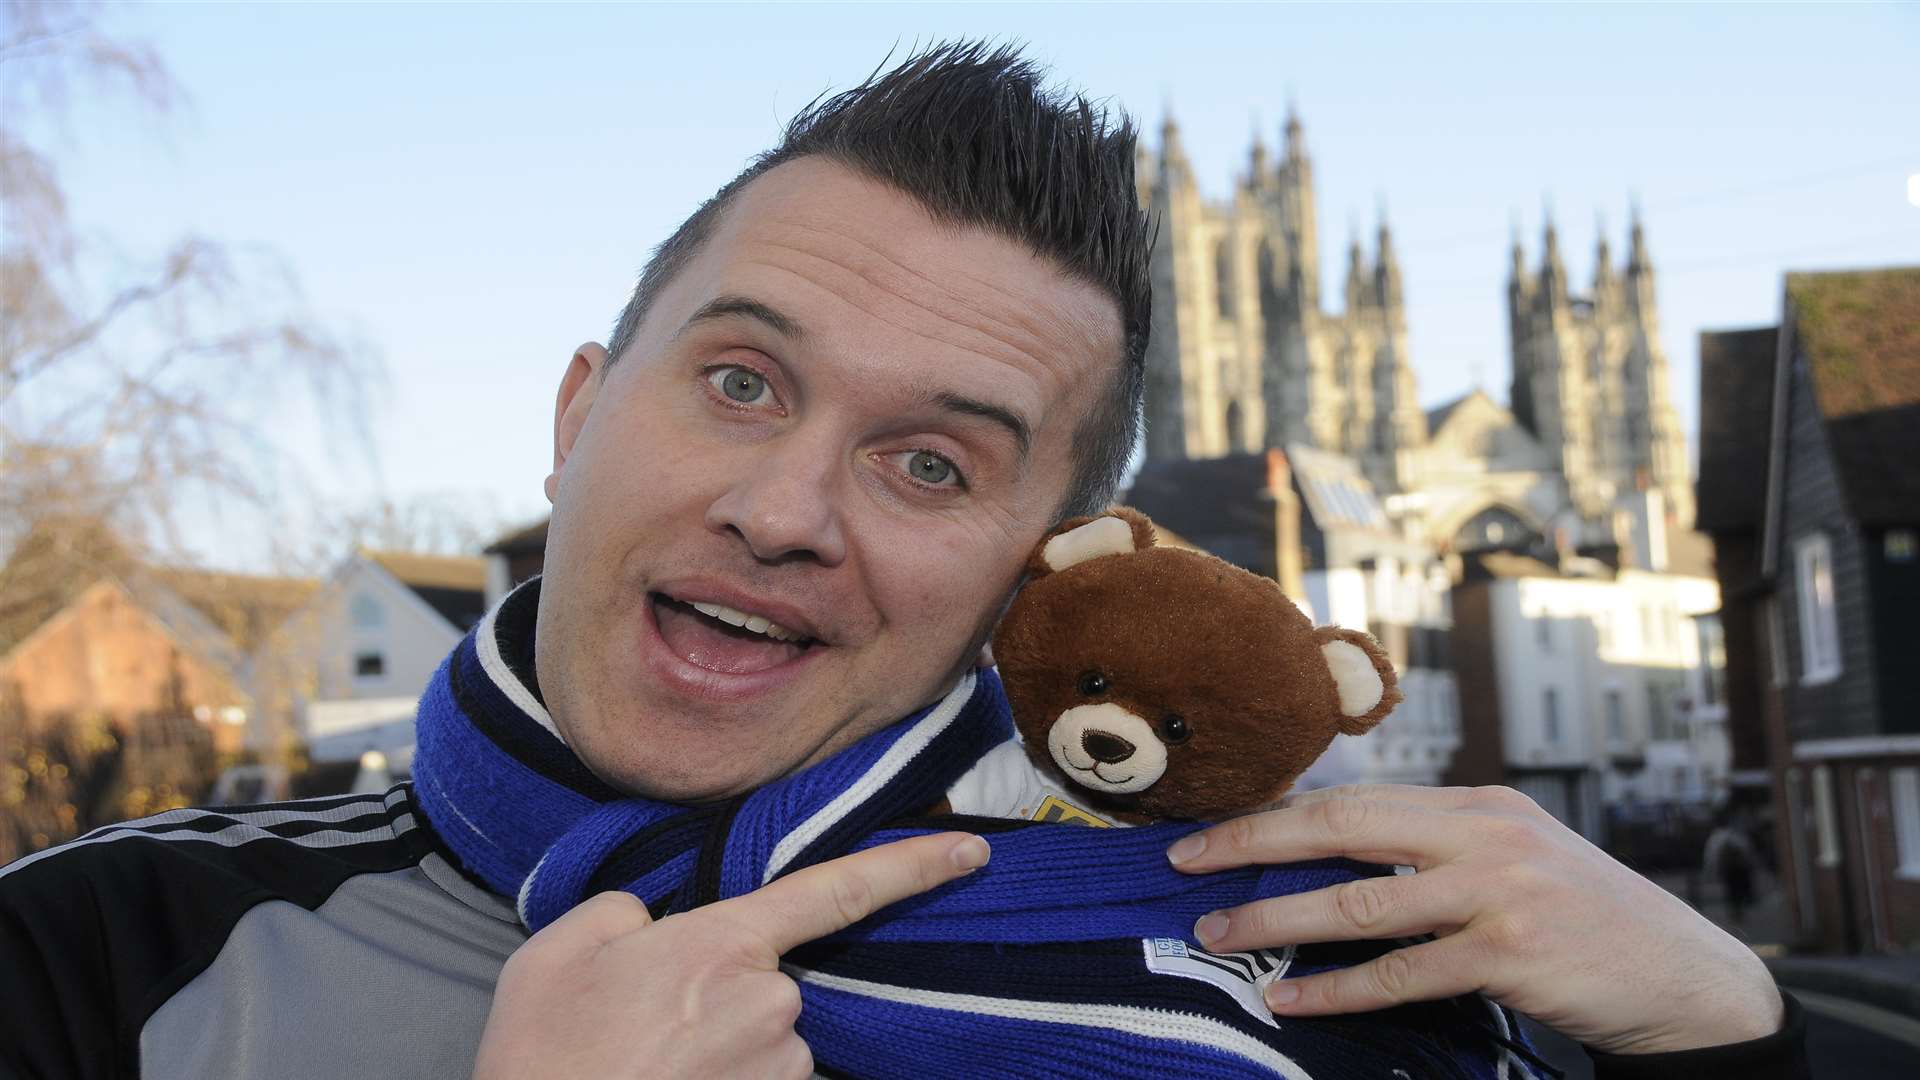 Phil Gallagher aka Mister Maker from the CBeebies television show with best friend Ted the bear.